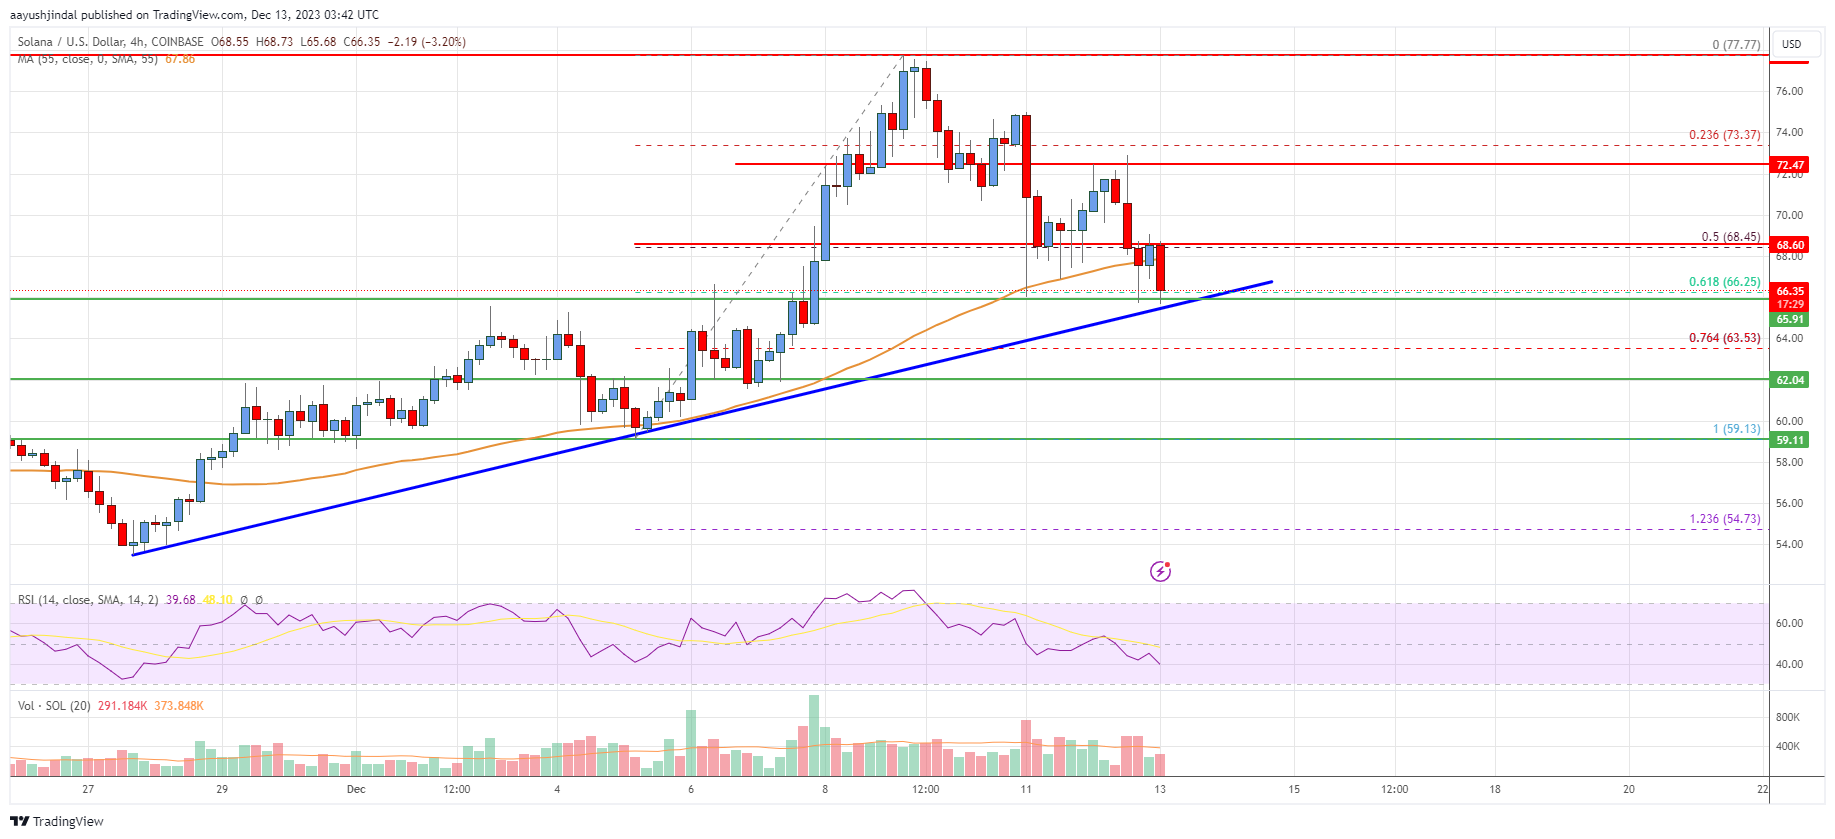 Solana (SOL) Price Analysis: Bulls Protecting Key Uptrend Support